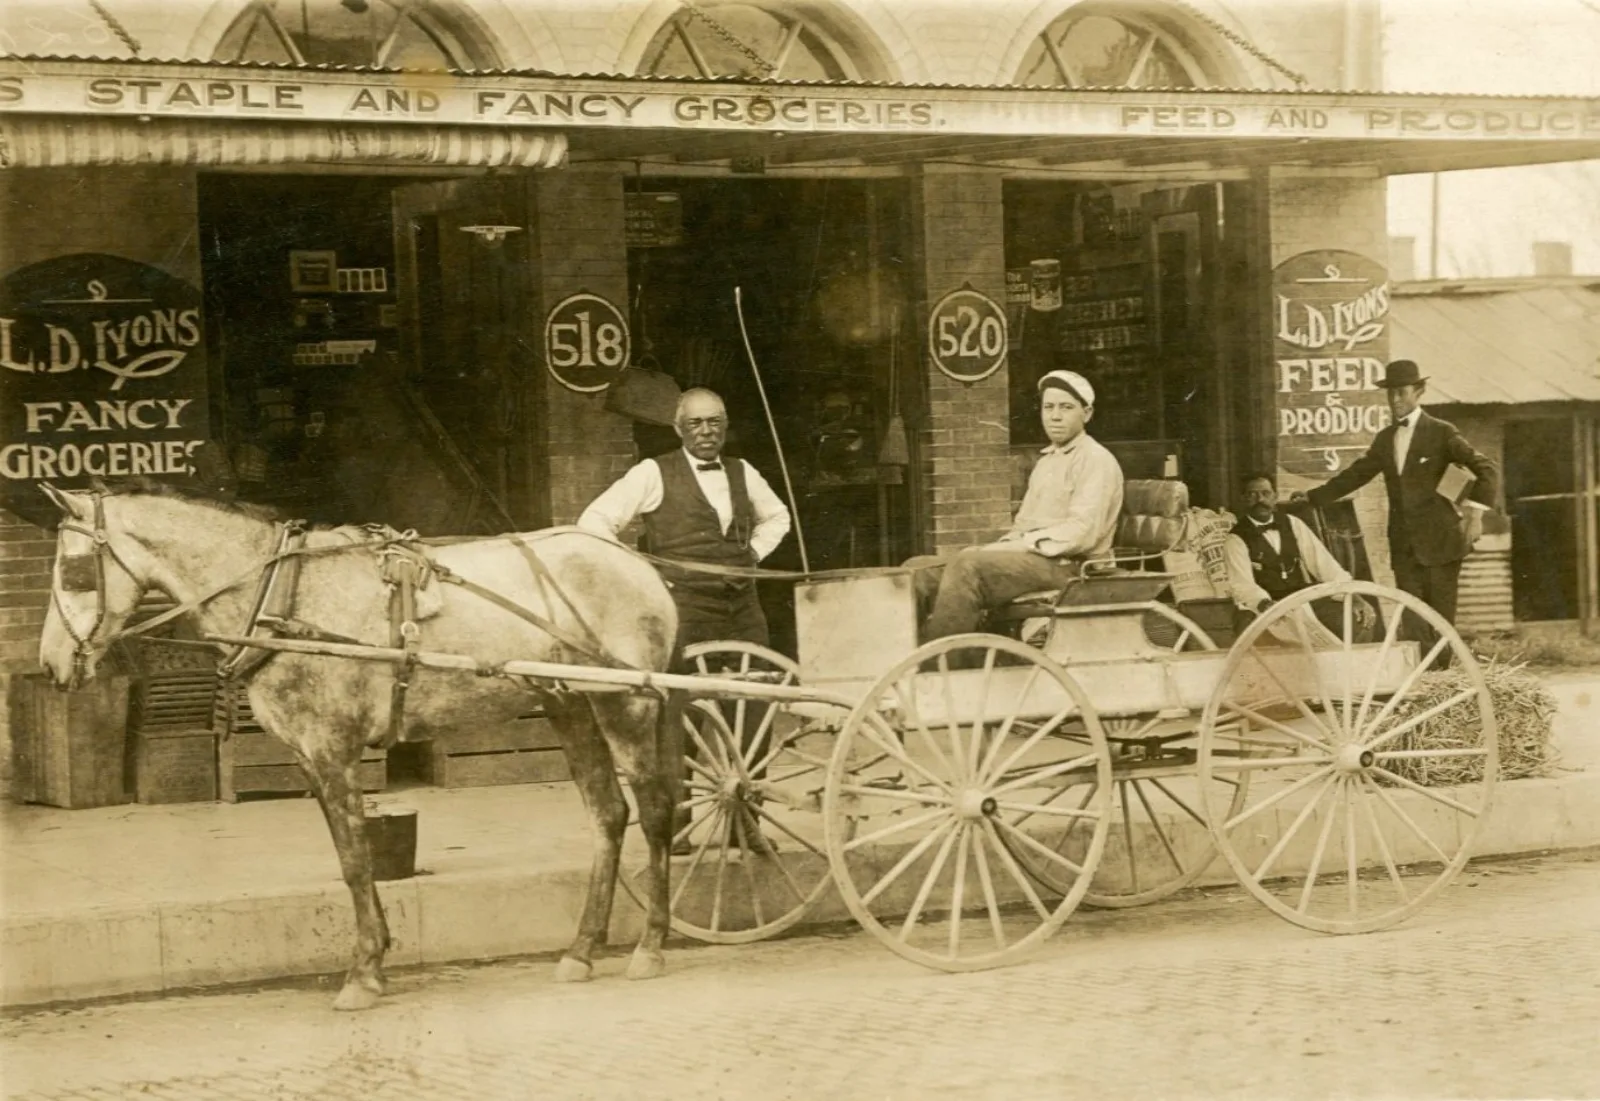 People pose around a horse and buggy. They're standing in front of a storefront with the words  "LD Lyons Fancy Groceries" on the facade.